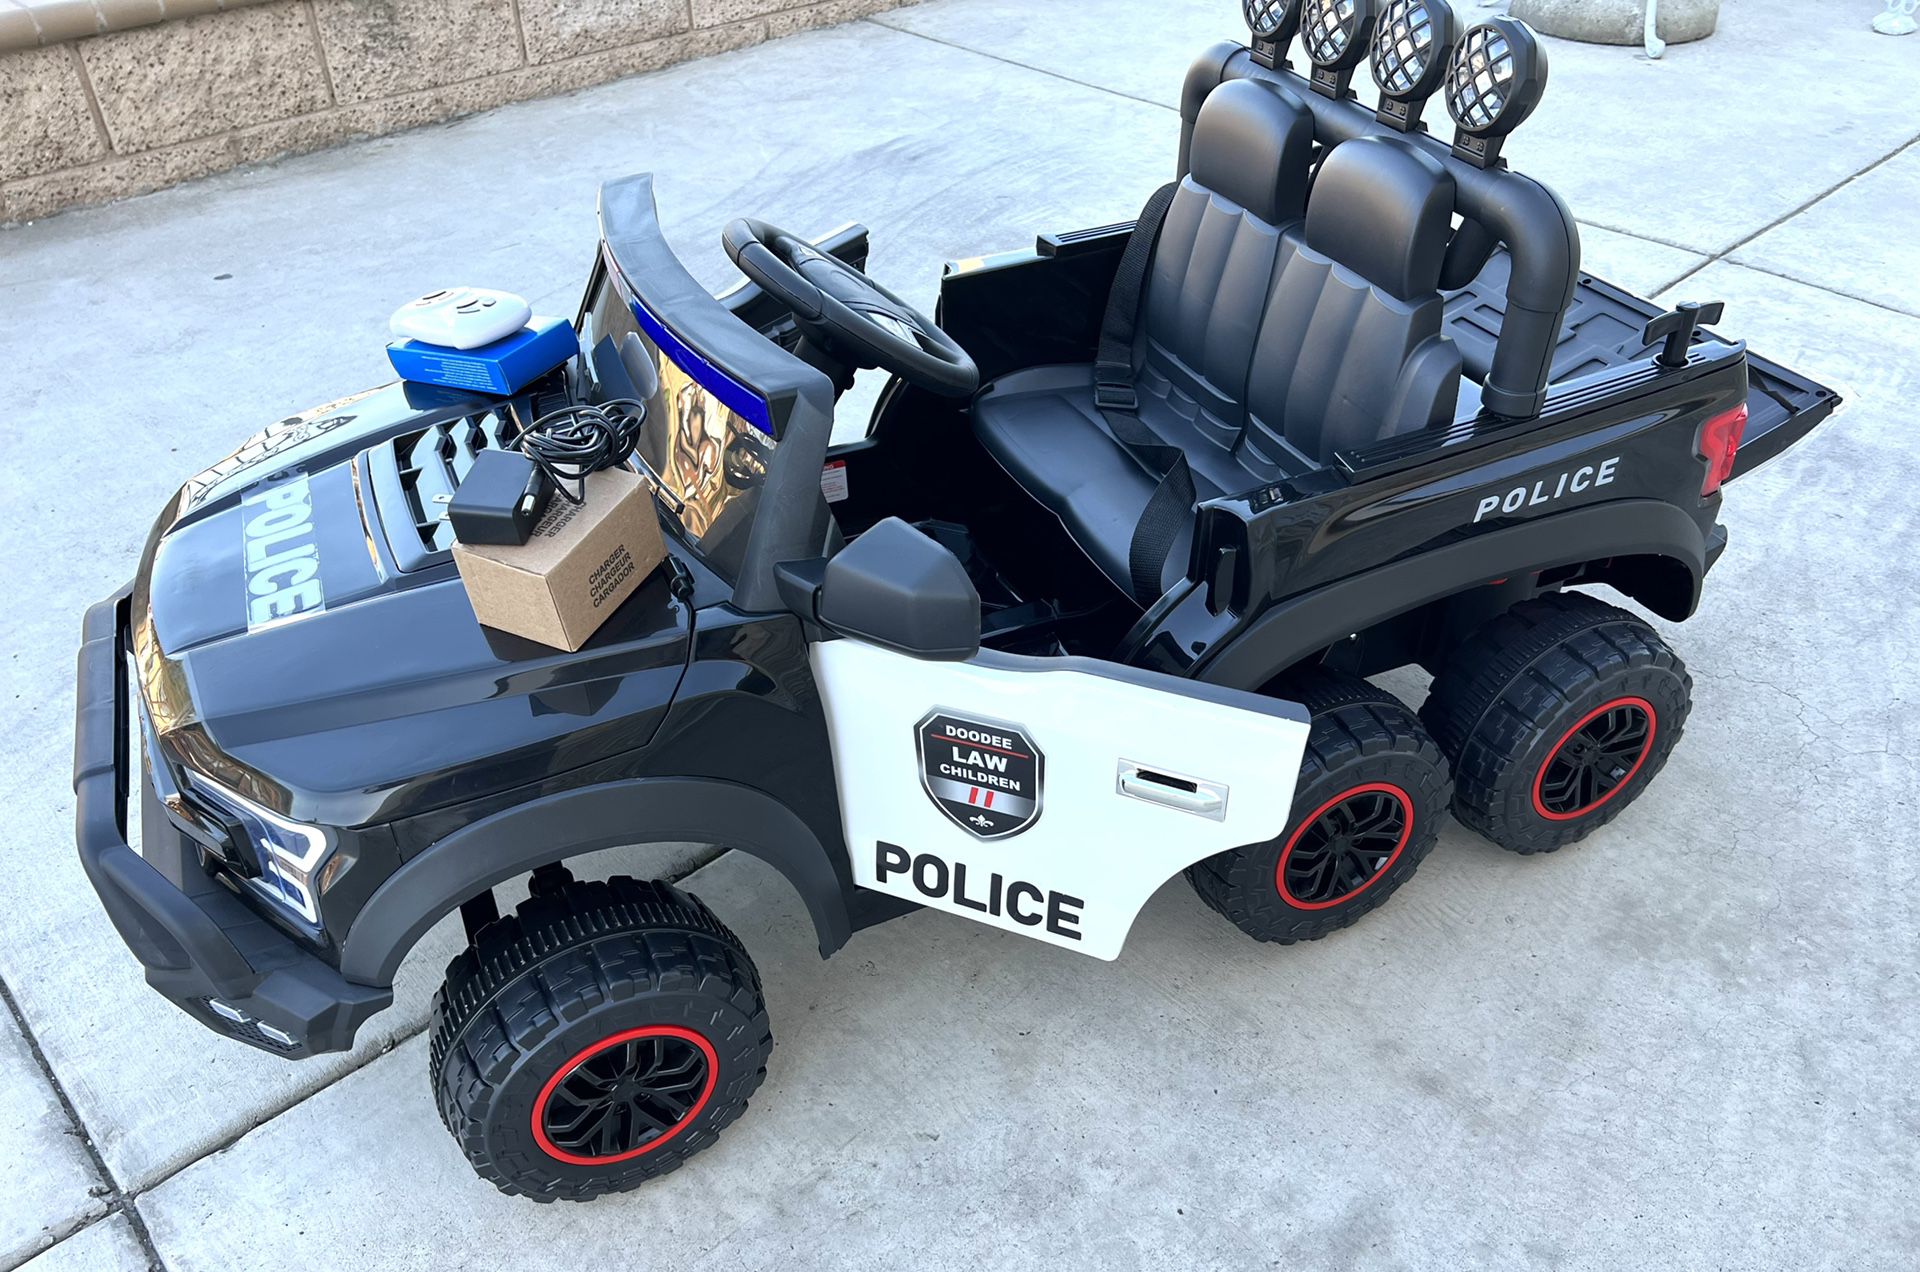 Police Truck 6x6 12v Remote Control Model Electric Kid Ride On Car Power Wheels with BLUETOOTH MUSIC - NEWEST MODEL Work with iPhone 📲 App